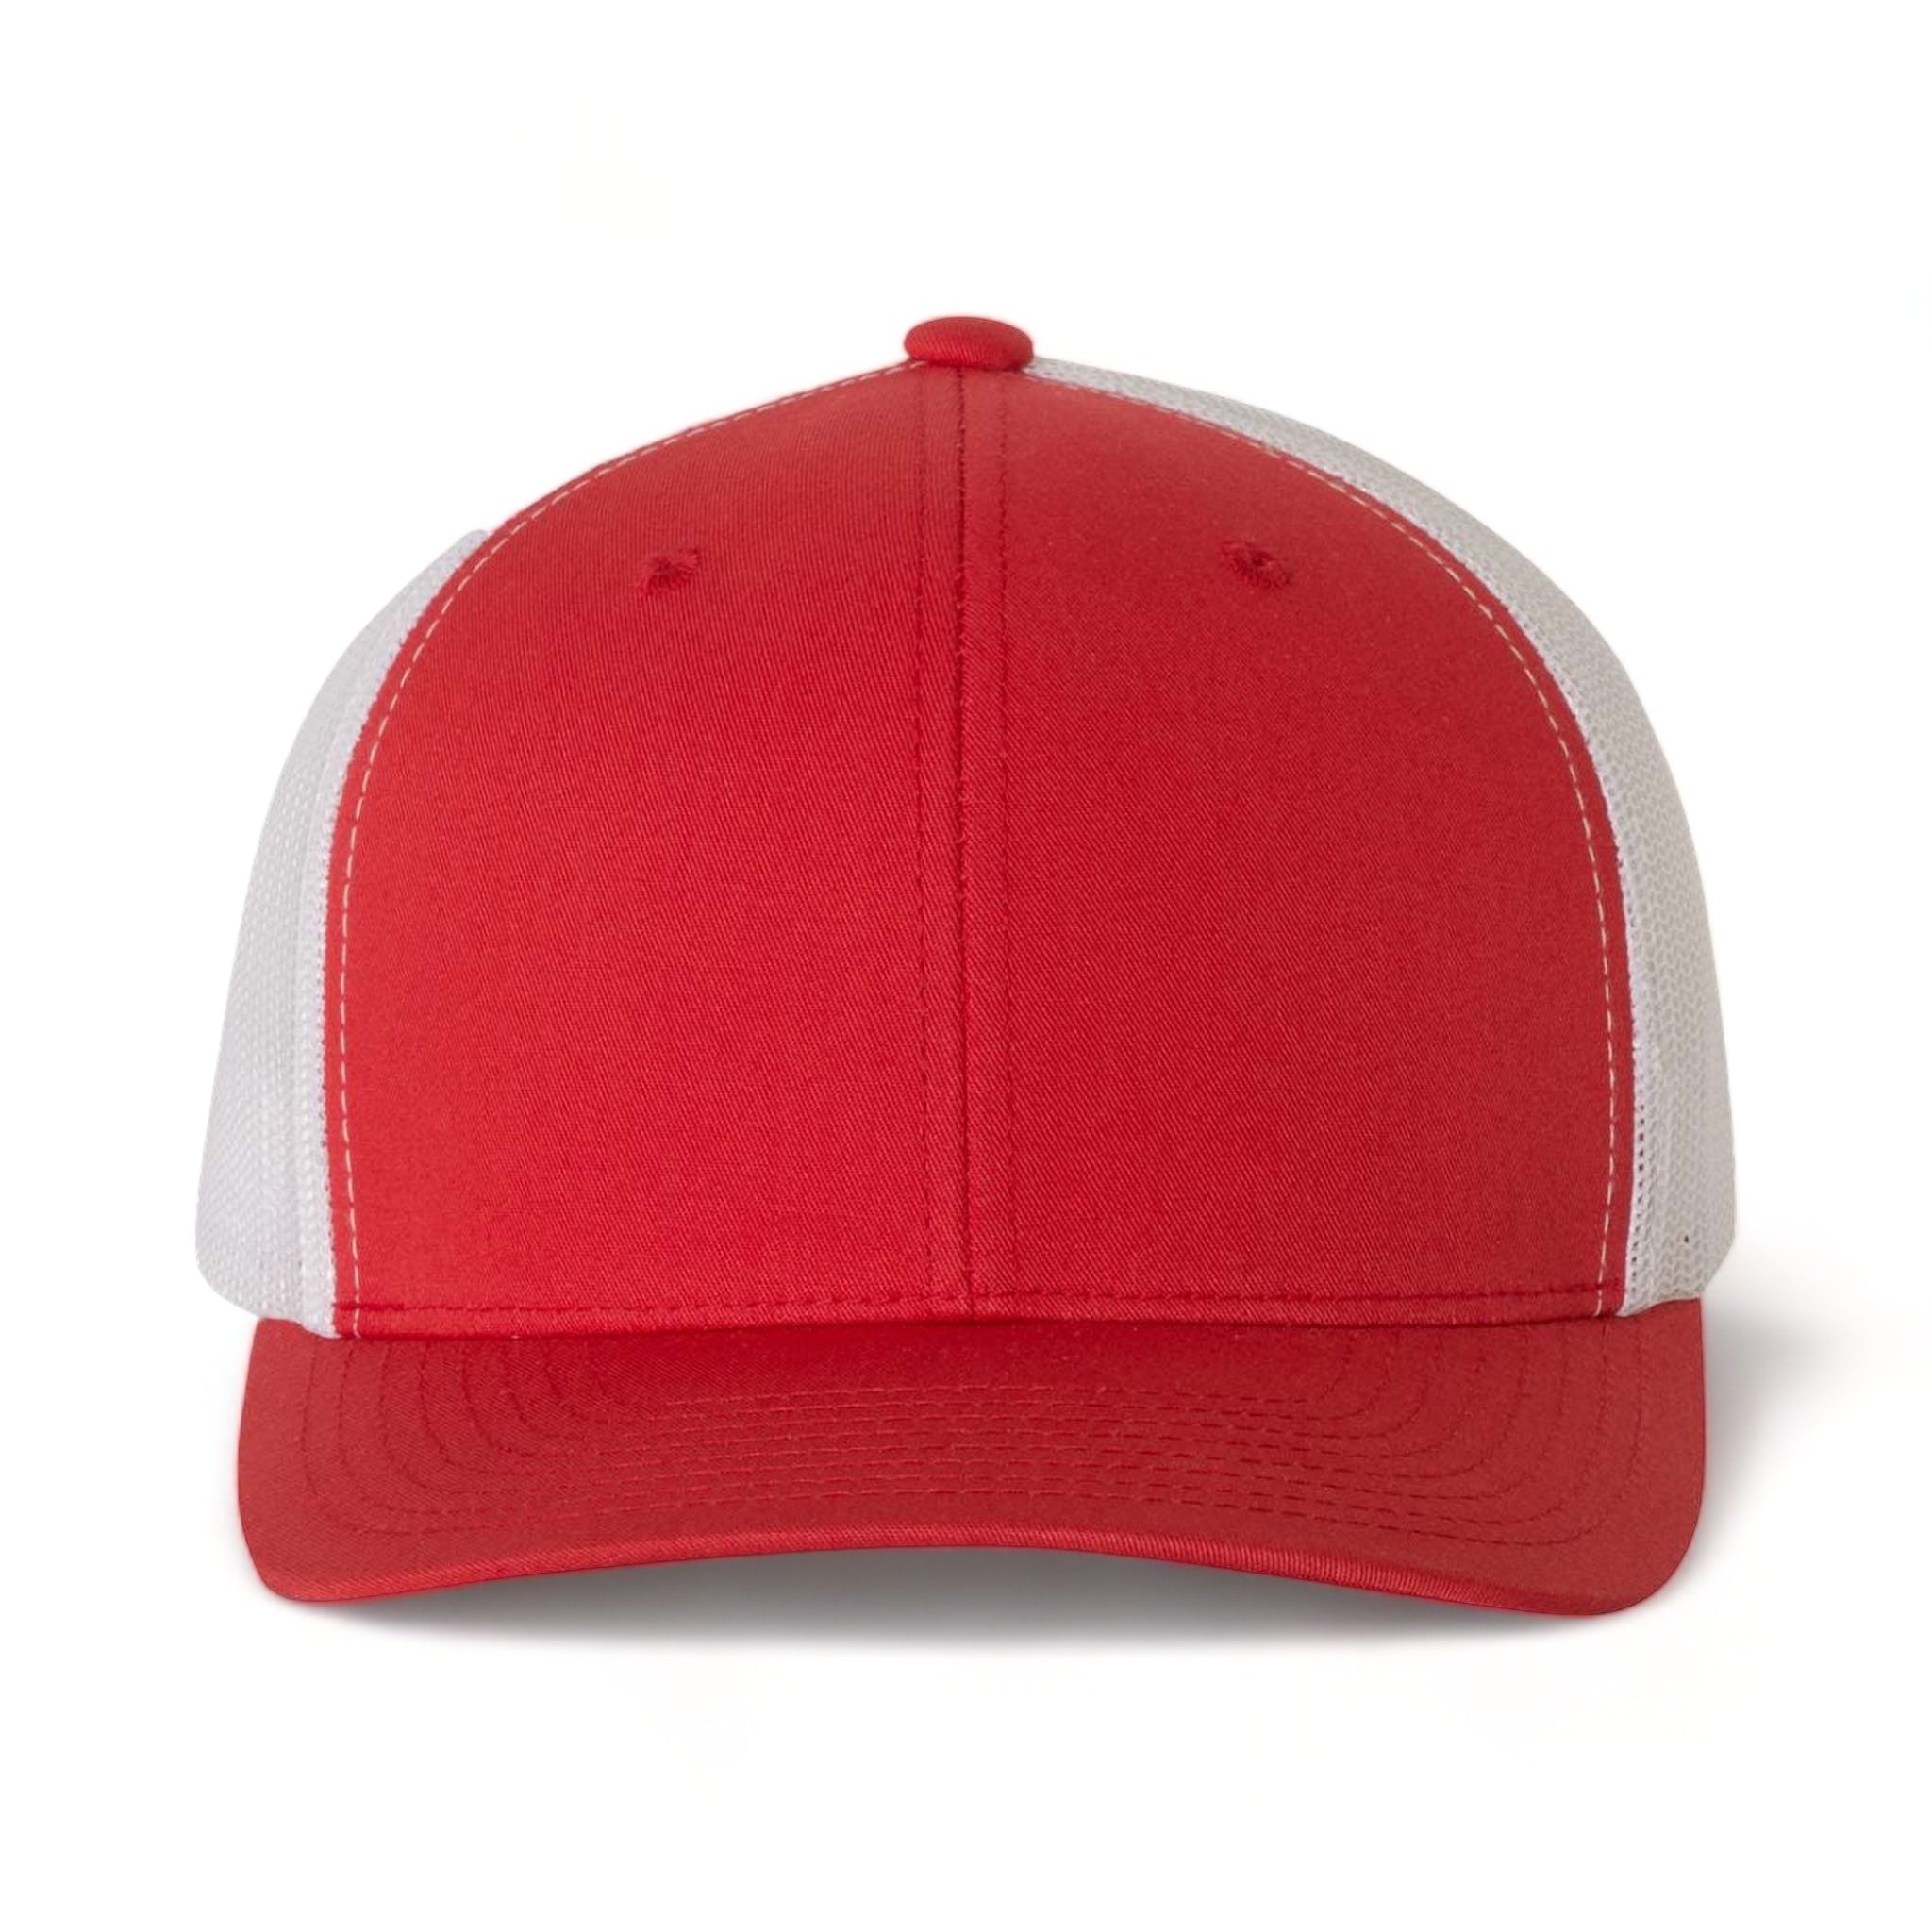 Front view of YP Classics 6606 custom hat in red and white